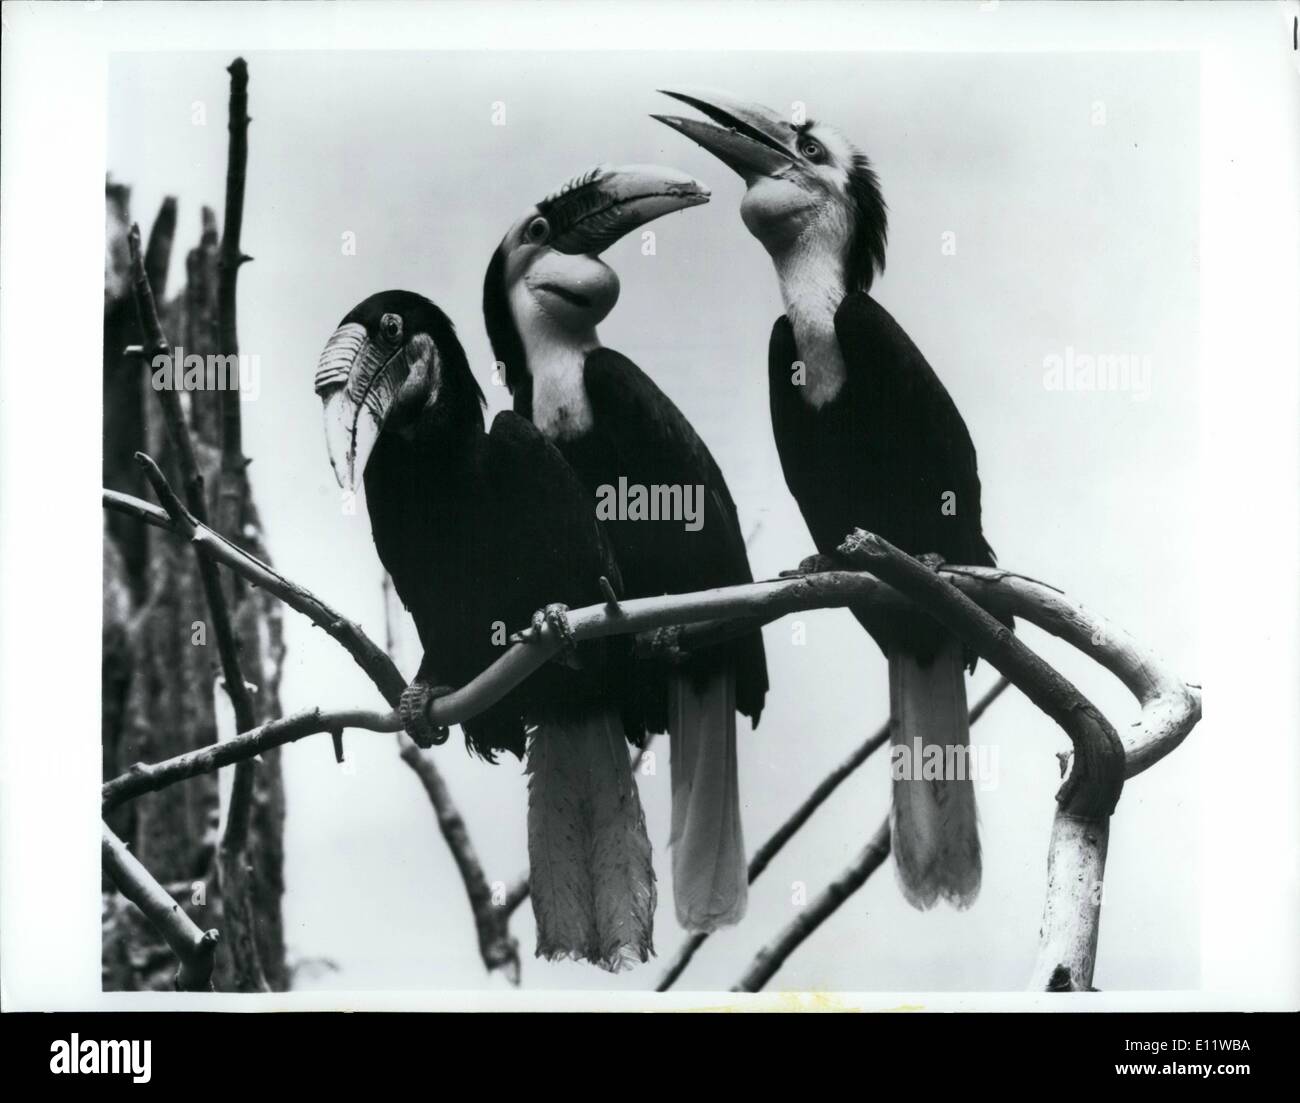 Aug. 27, 1980 - August 27, 1980 Bronx, N.Y. A family group of Malayan wreathed hornbills at the Bronx Zoo poses for a picture in the World of Birds. That's mother on the left her throat pouch is dark blue in color. Next to her is father, with his recognizable yellow throat pouch, and on the right is baby. The chick, only recently emerged from the nest, is already as large as its parents, but lacks the ridged, or wreathed, bill that characterizes the adults. All young hornbills are the spitting image of father that is, they have yellow throat-markings Stock Photo